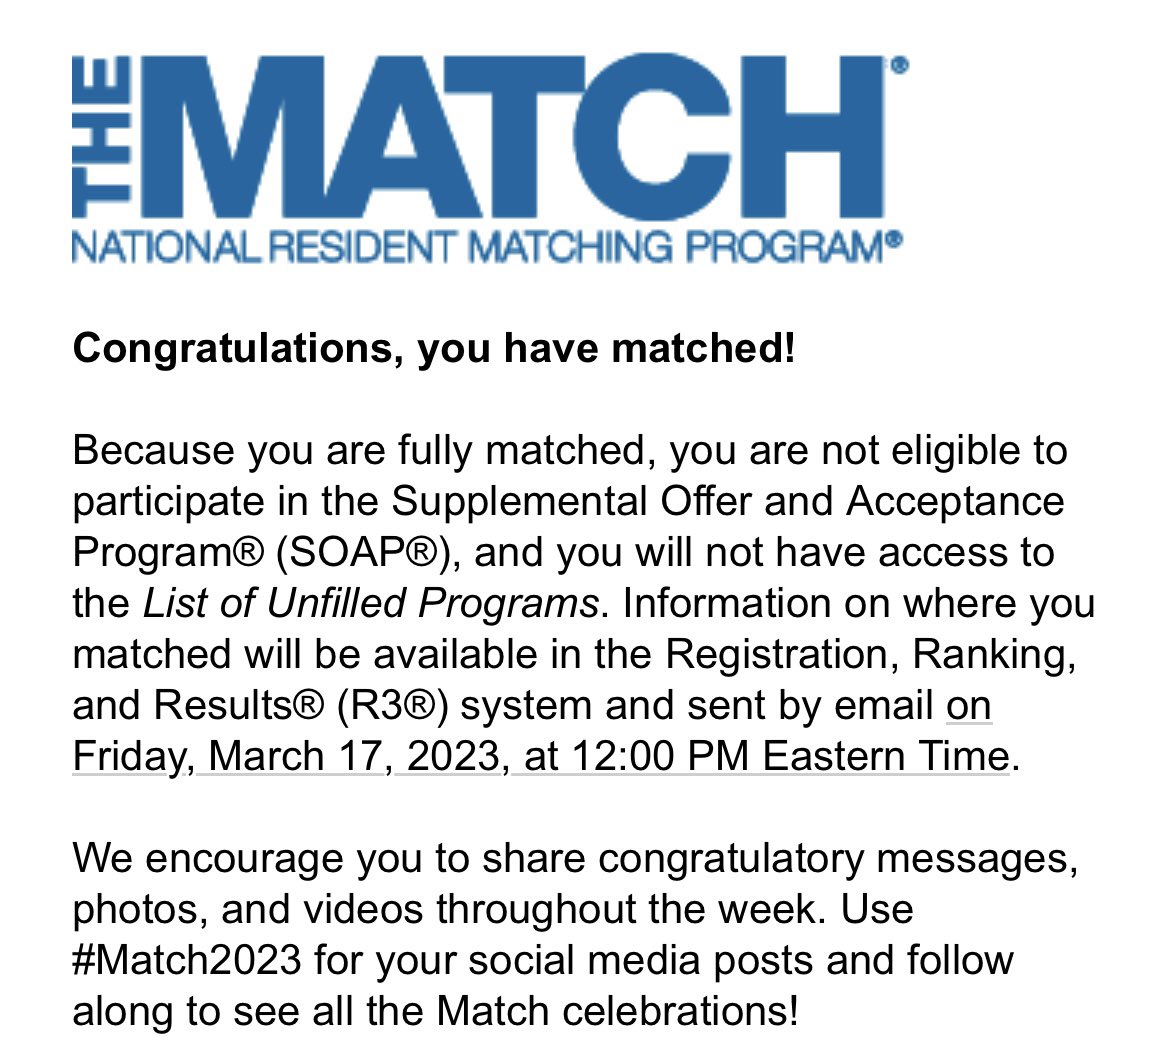 Lets gooo. Growing up, I hated when our parents dressed us the same but this is a MATCH that I’ll take! Blessed to be continuing the next step of my journey with my twin bro! #Match2023 @Twinmed24